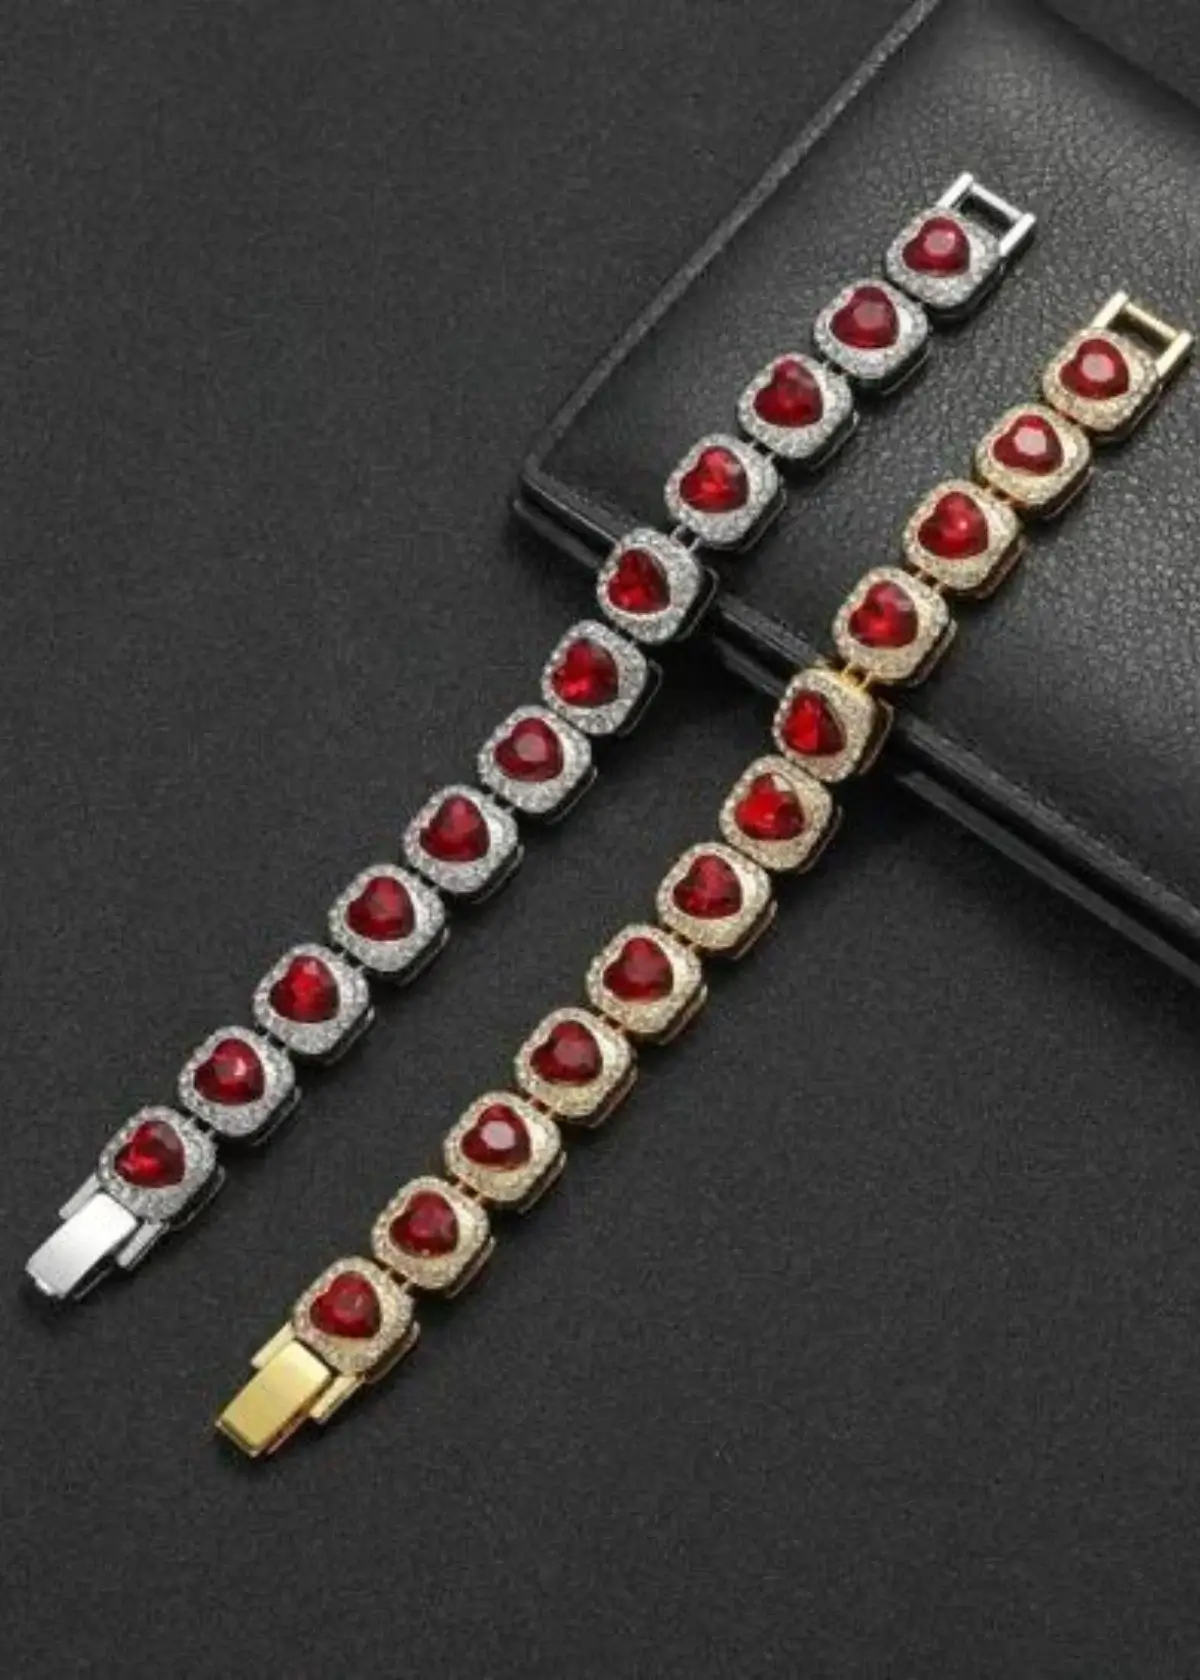 What metals pair well with ruby in a men's bracelet?